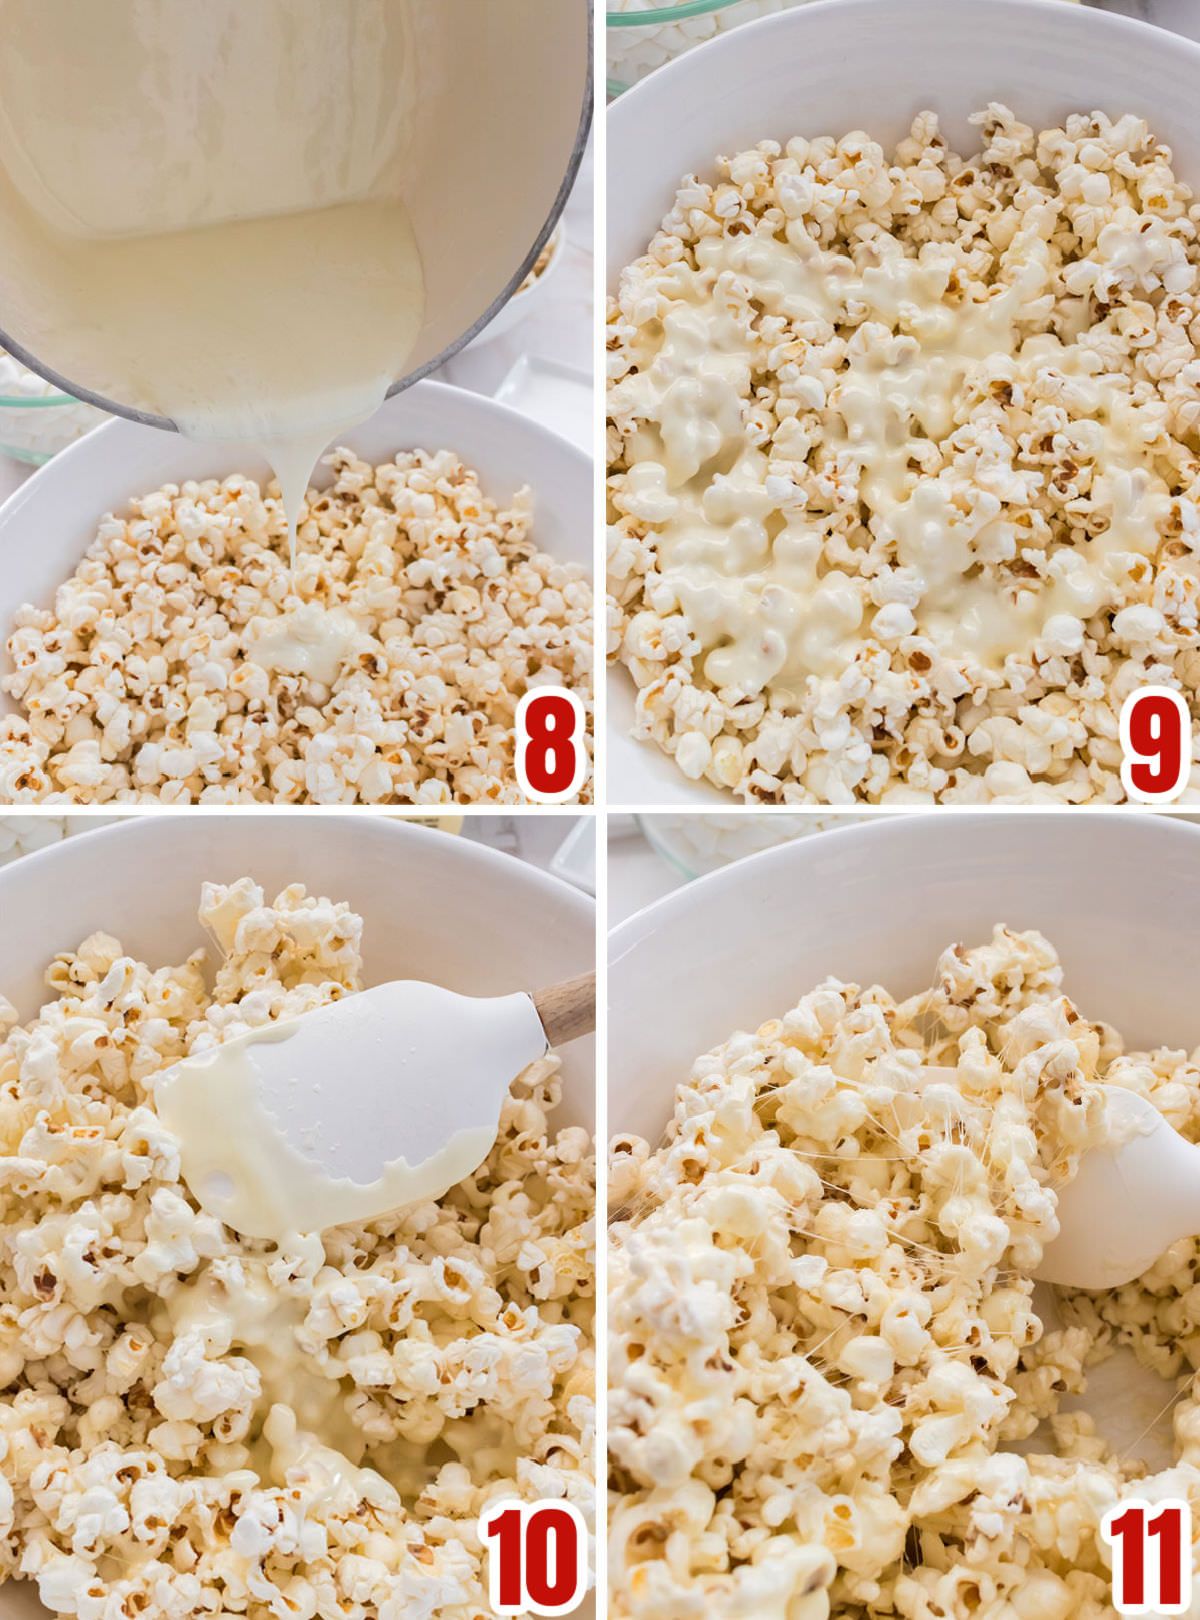 Collage image showing how to cover the popcorn with the marshmallow mixture.